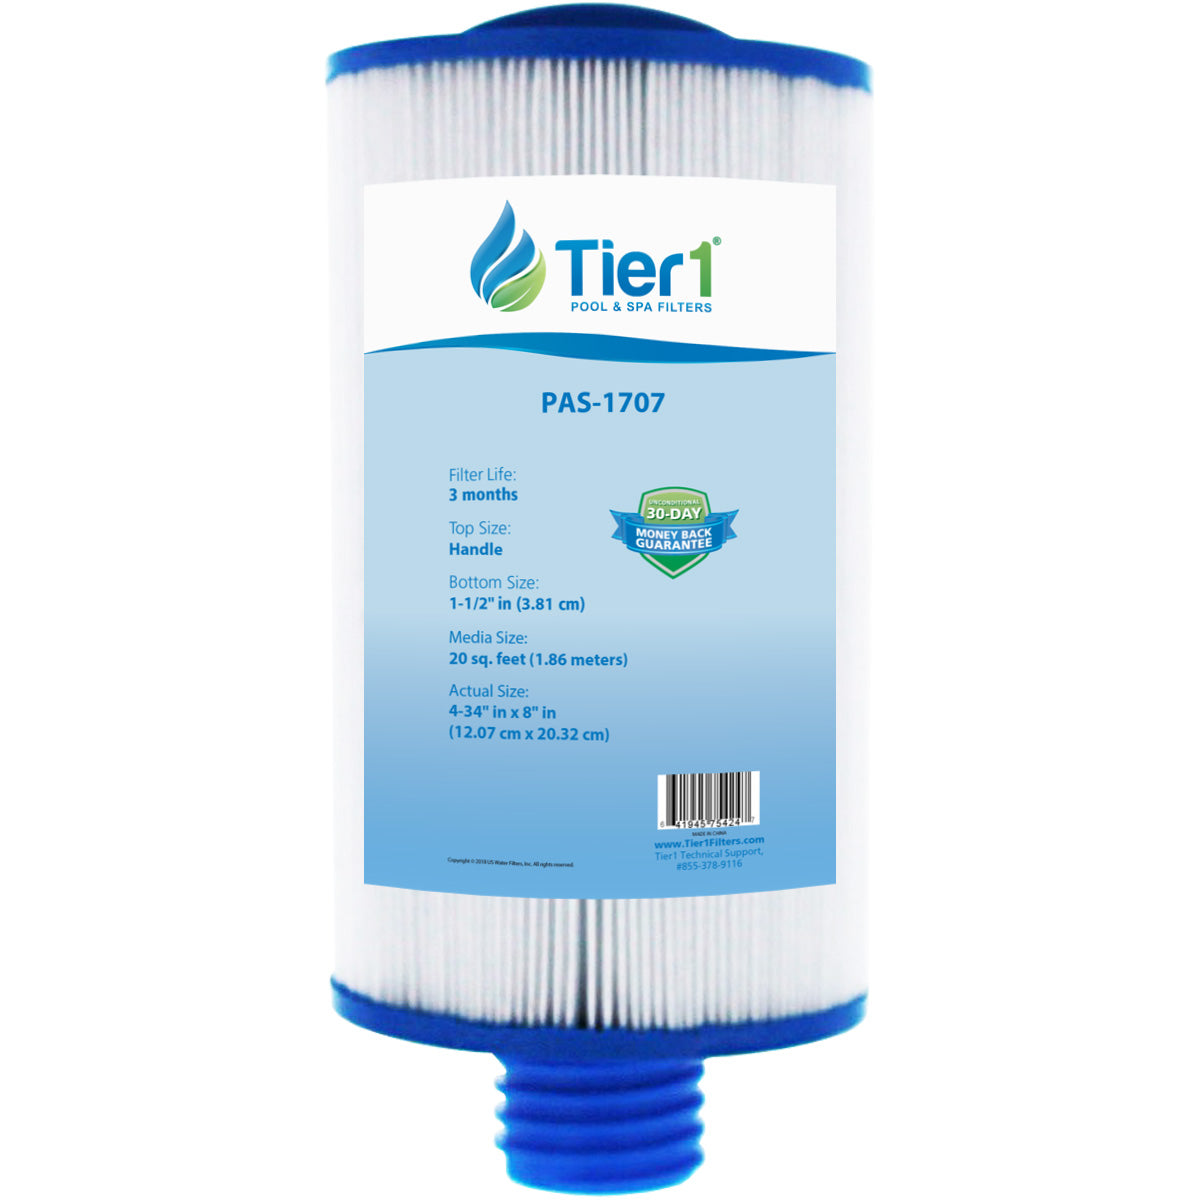 PLEATCO-PSANT20P3 Comparable Replacement filter Cartridge by Tier1